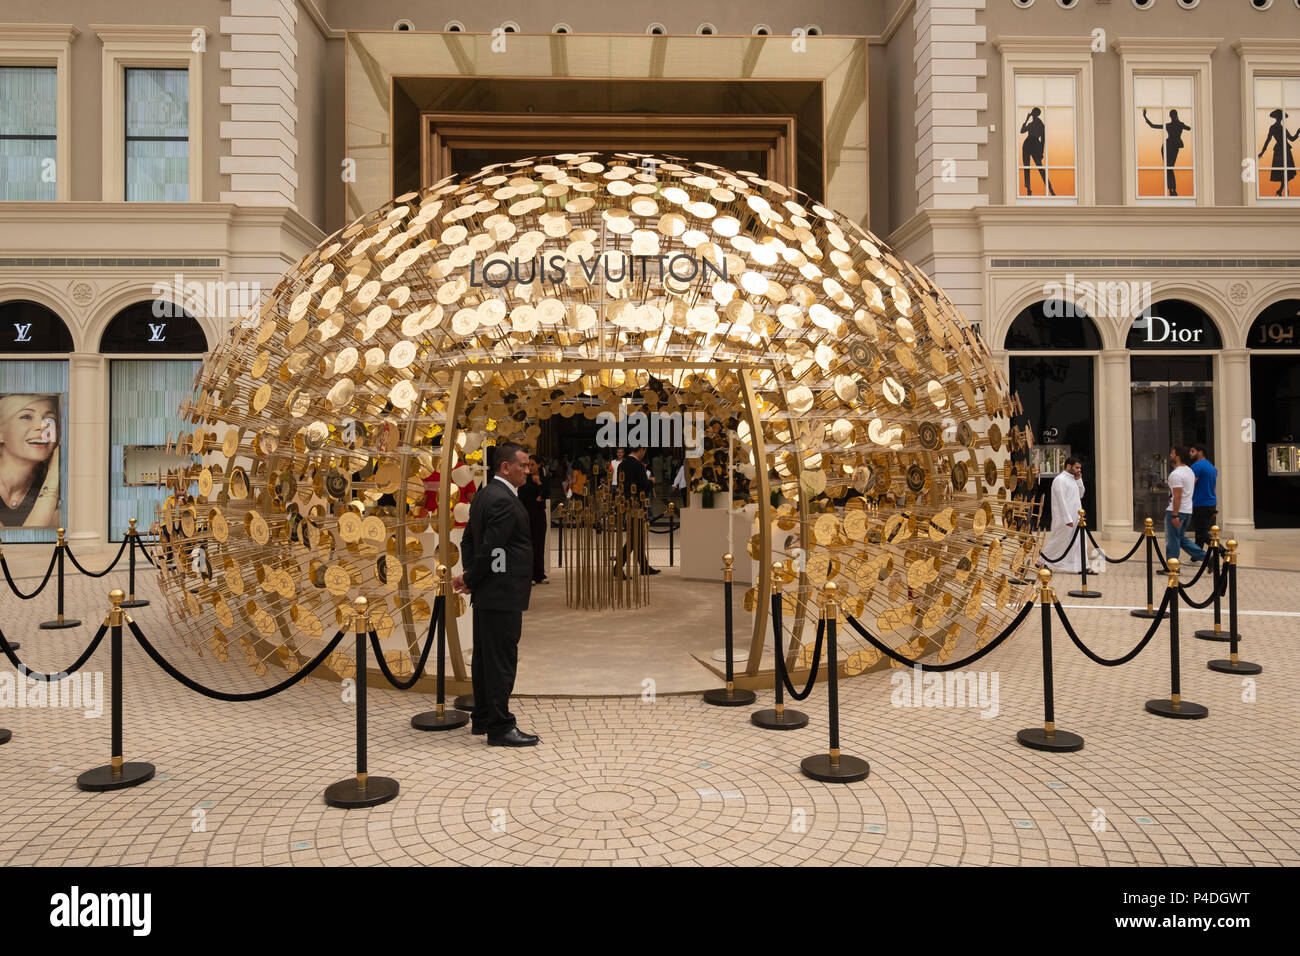 Louis Vuitton ornate display at The Avenues shopping mall in